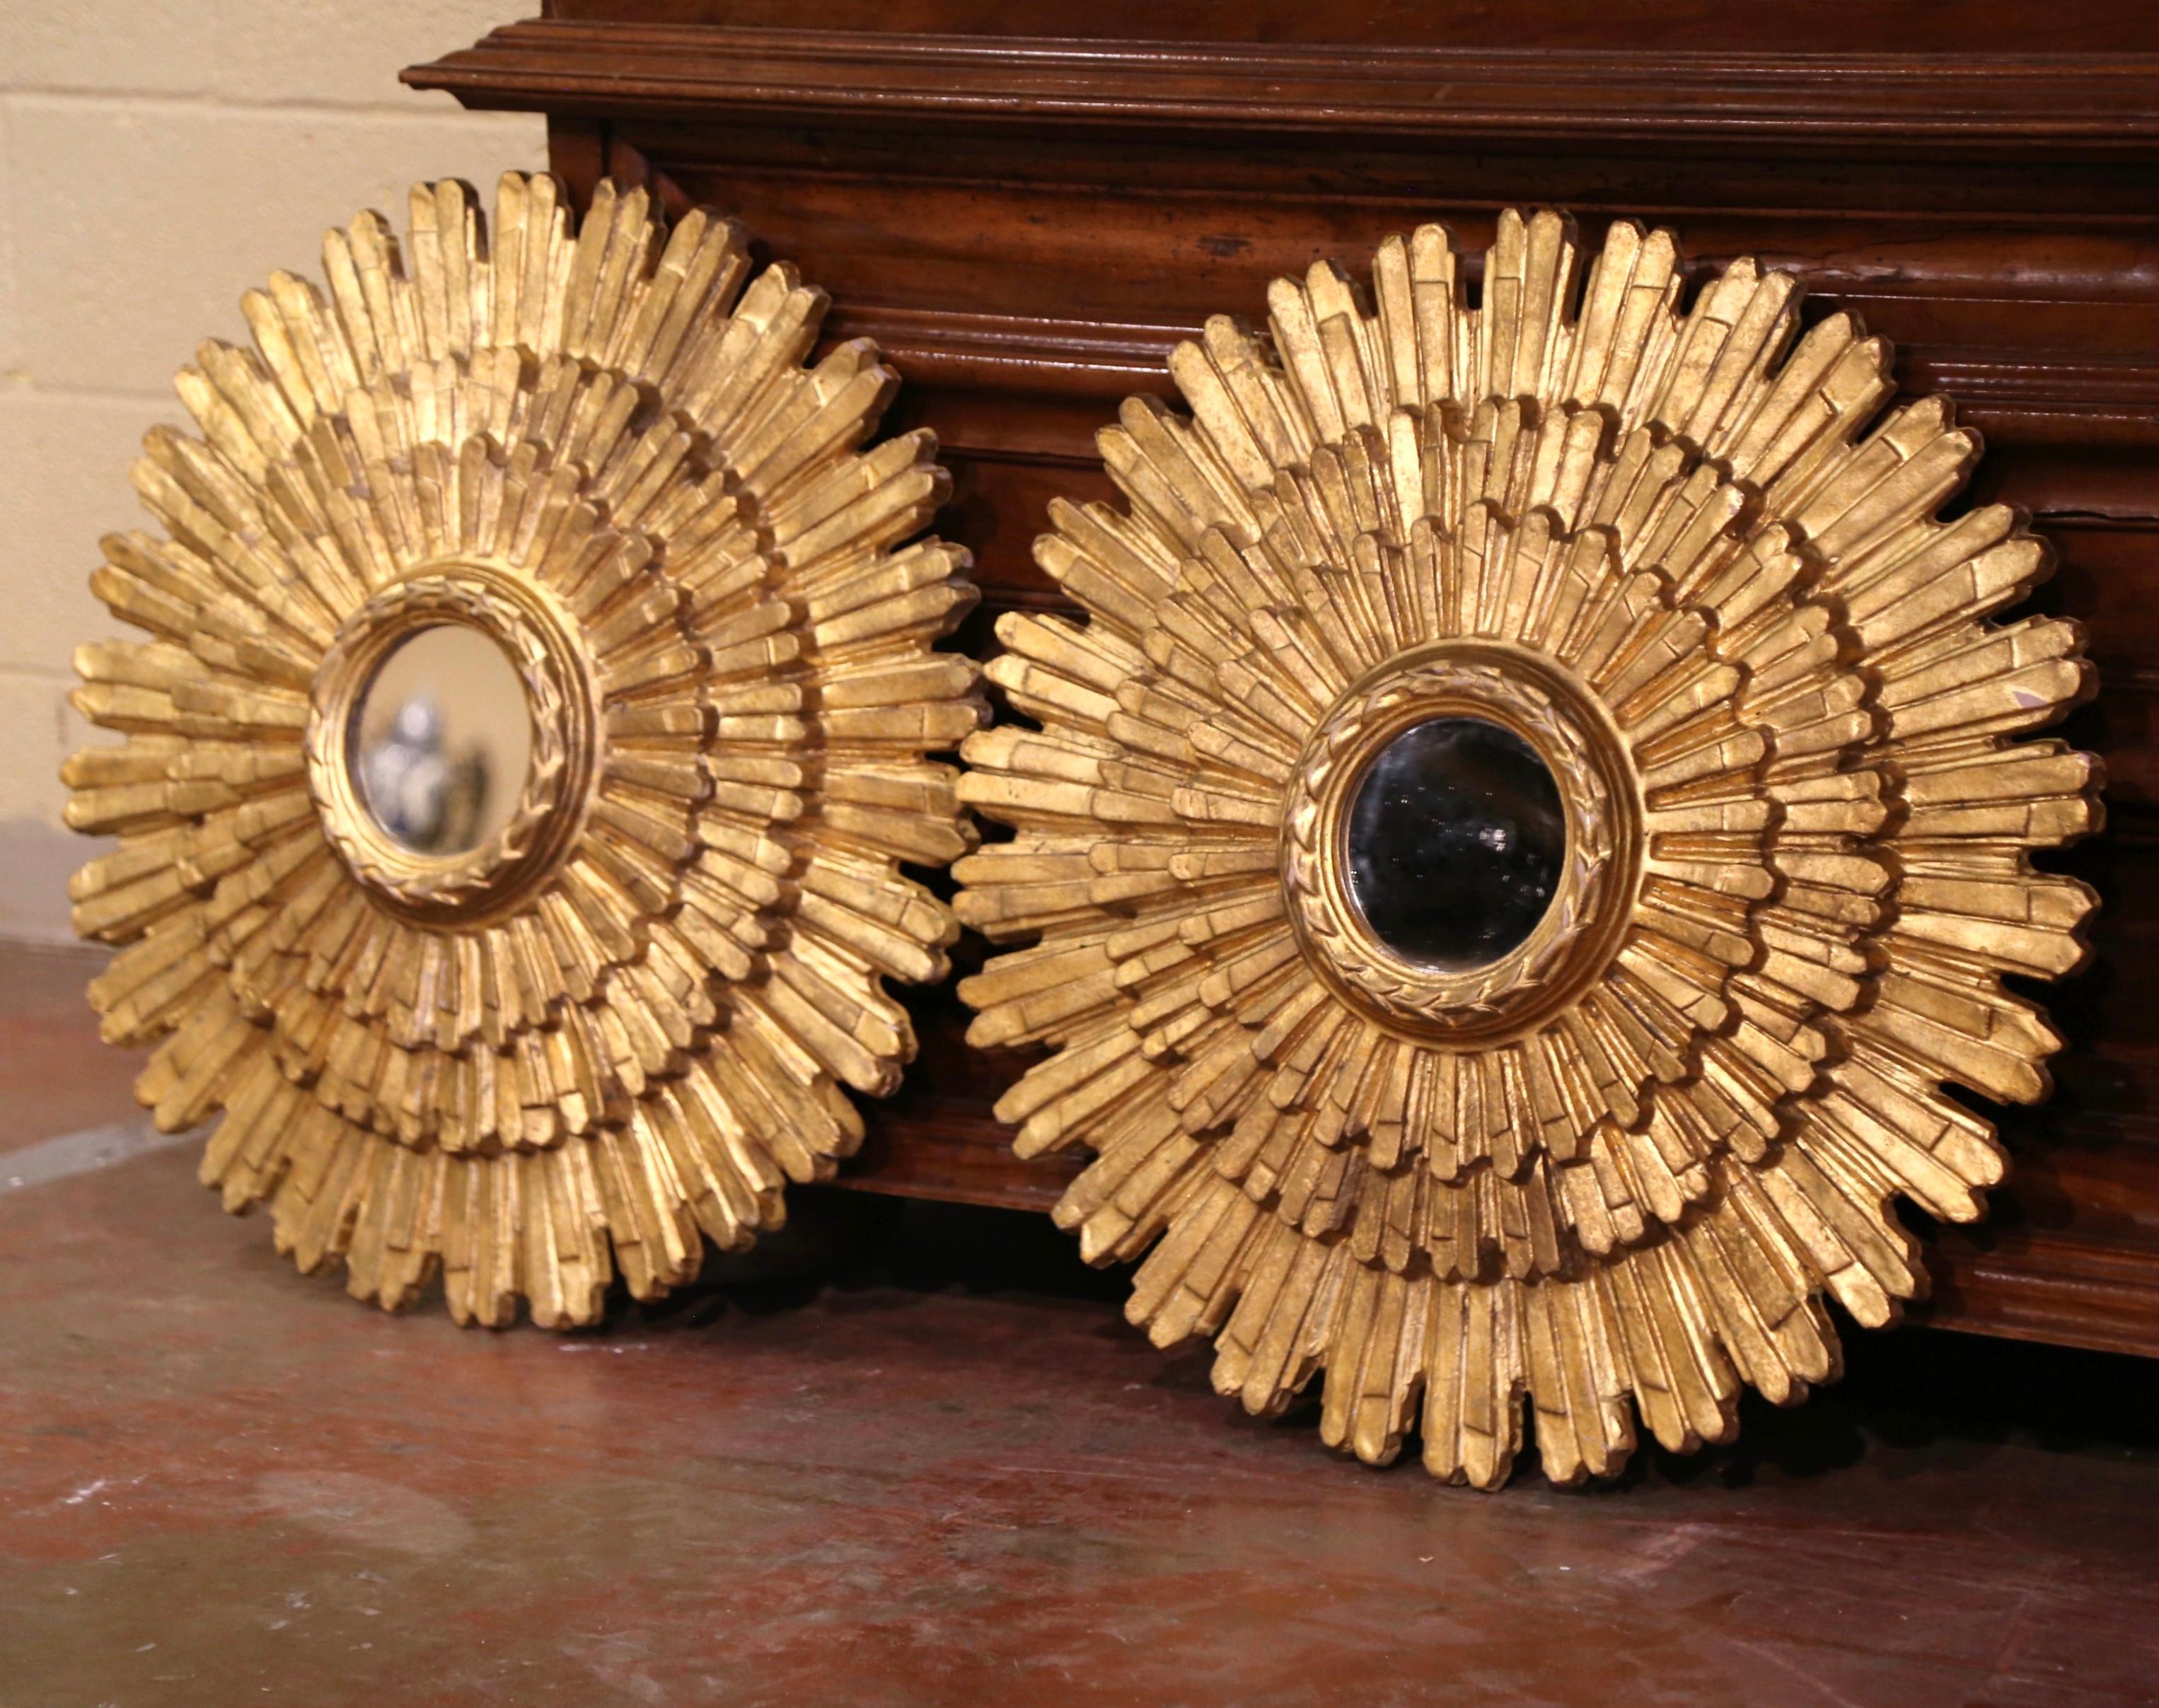 Add a beautiful shine to your home with this pair of eye-catching sun mirrors. Created in Italy circa 2010, each mirror has a Classic Sunbeam shape with three-tier rays, a central circular mirror plate encircled by a band carved and gilt to resemble